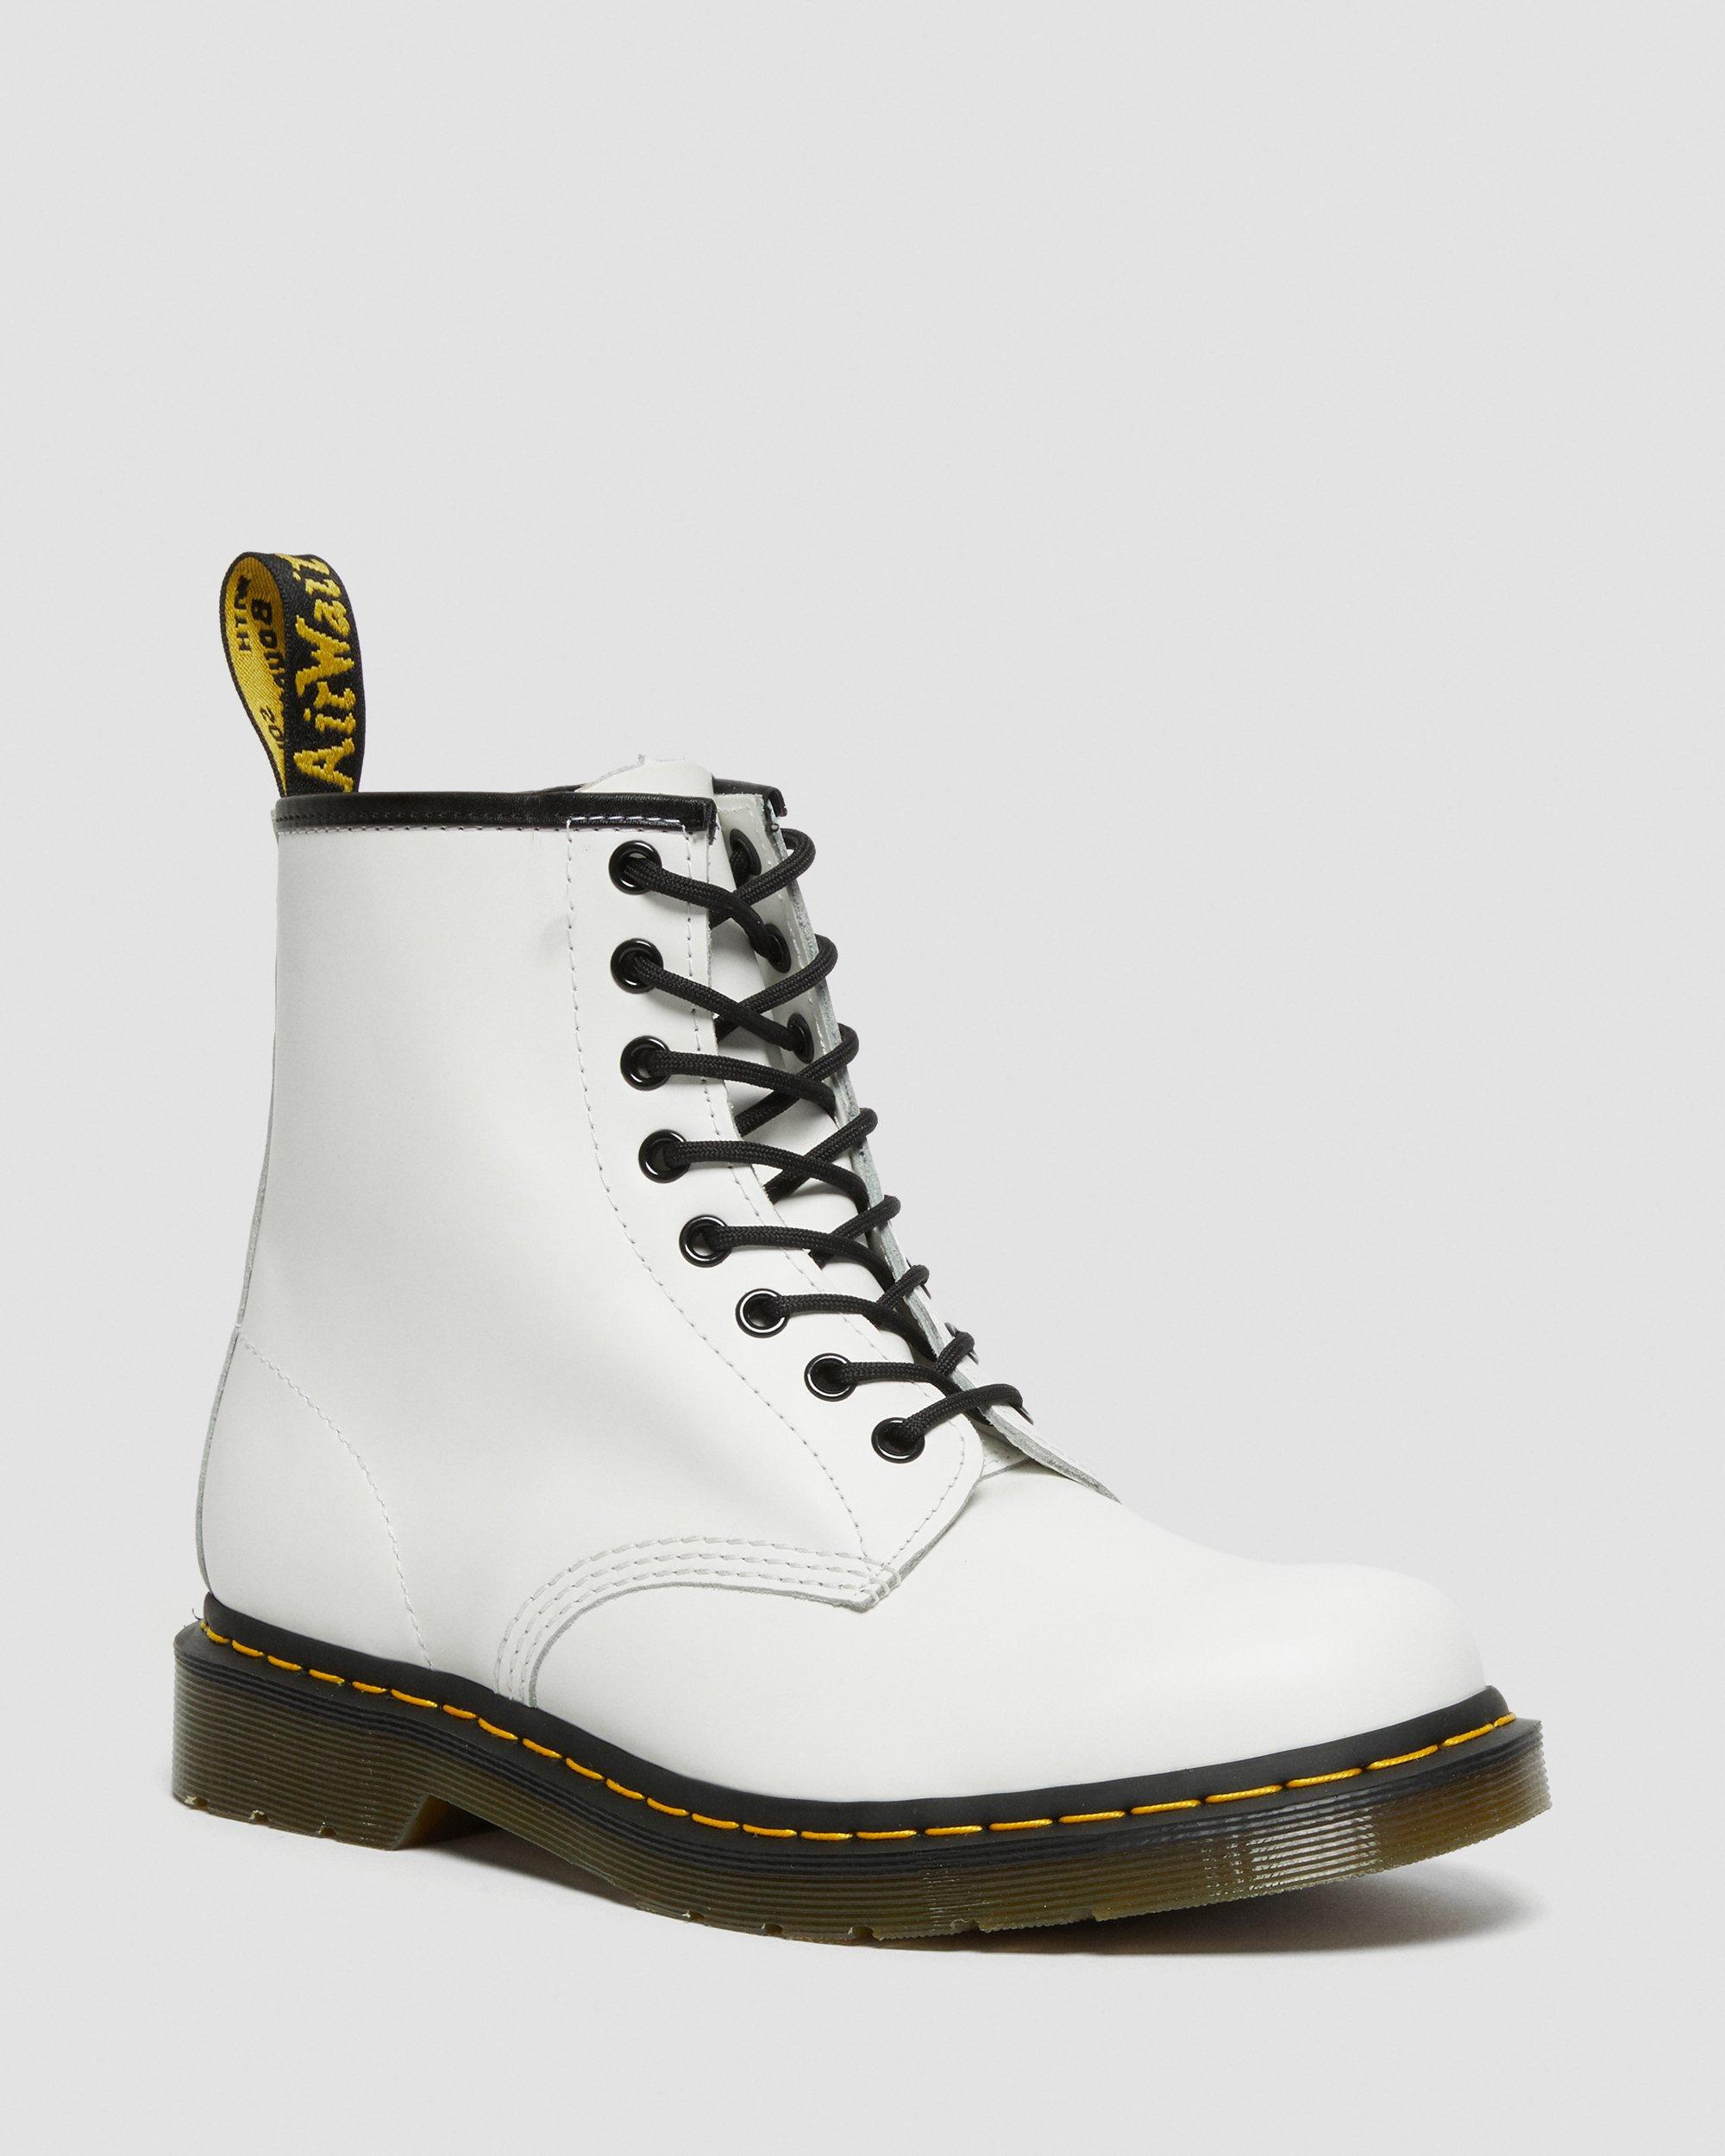 white low dr martens